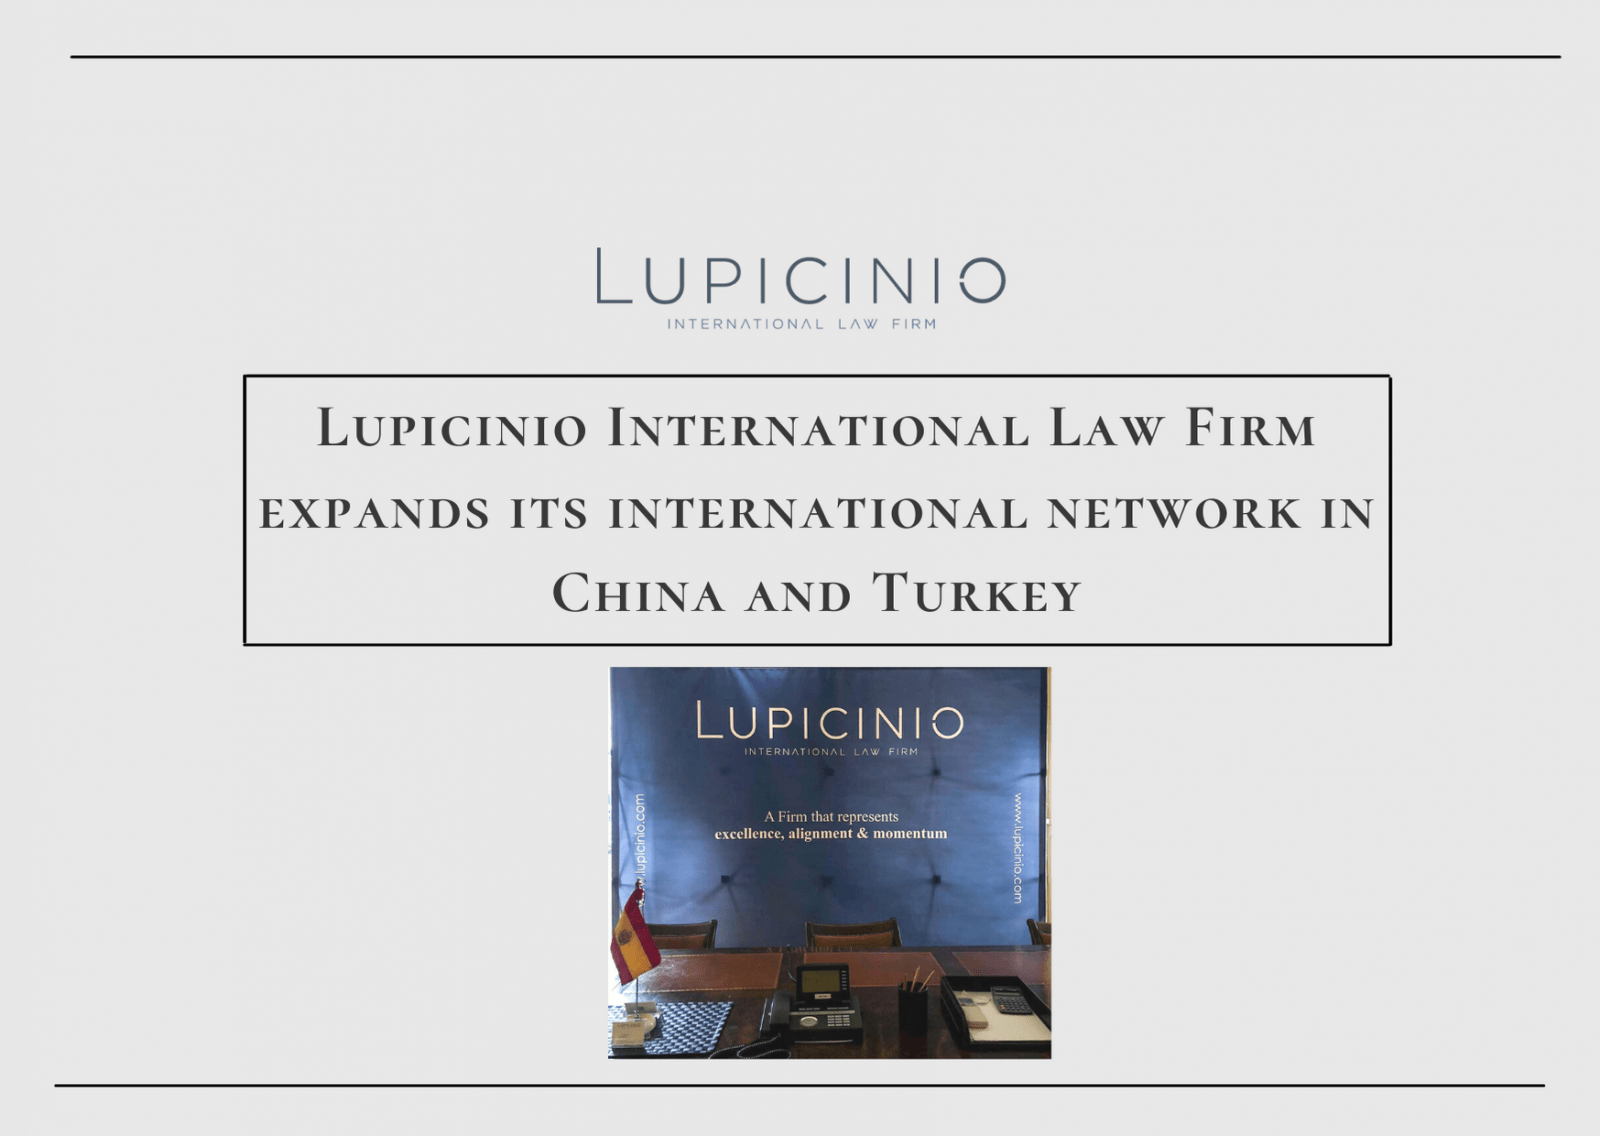 Lupicinio International Law Firm expands its international network in China and Turkey